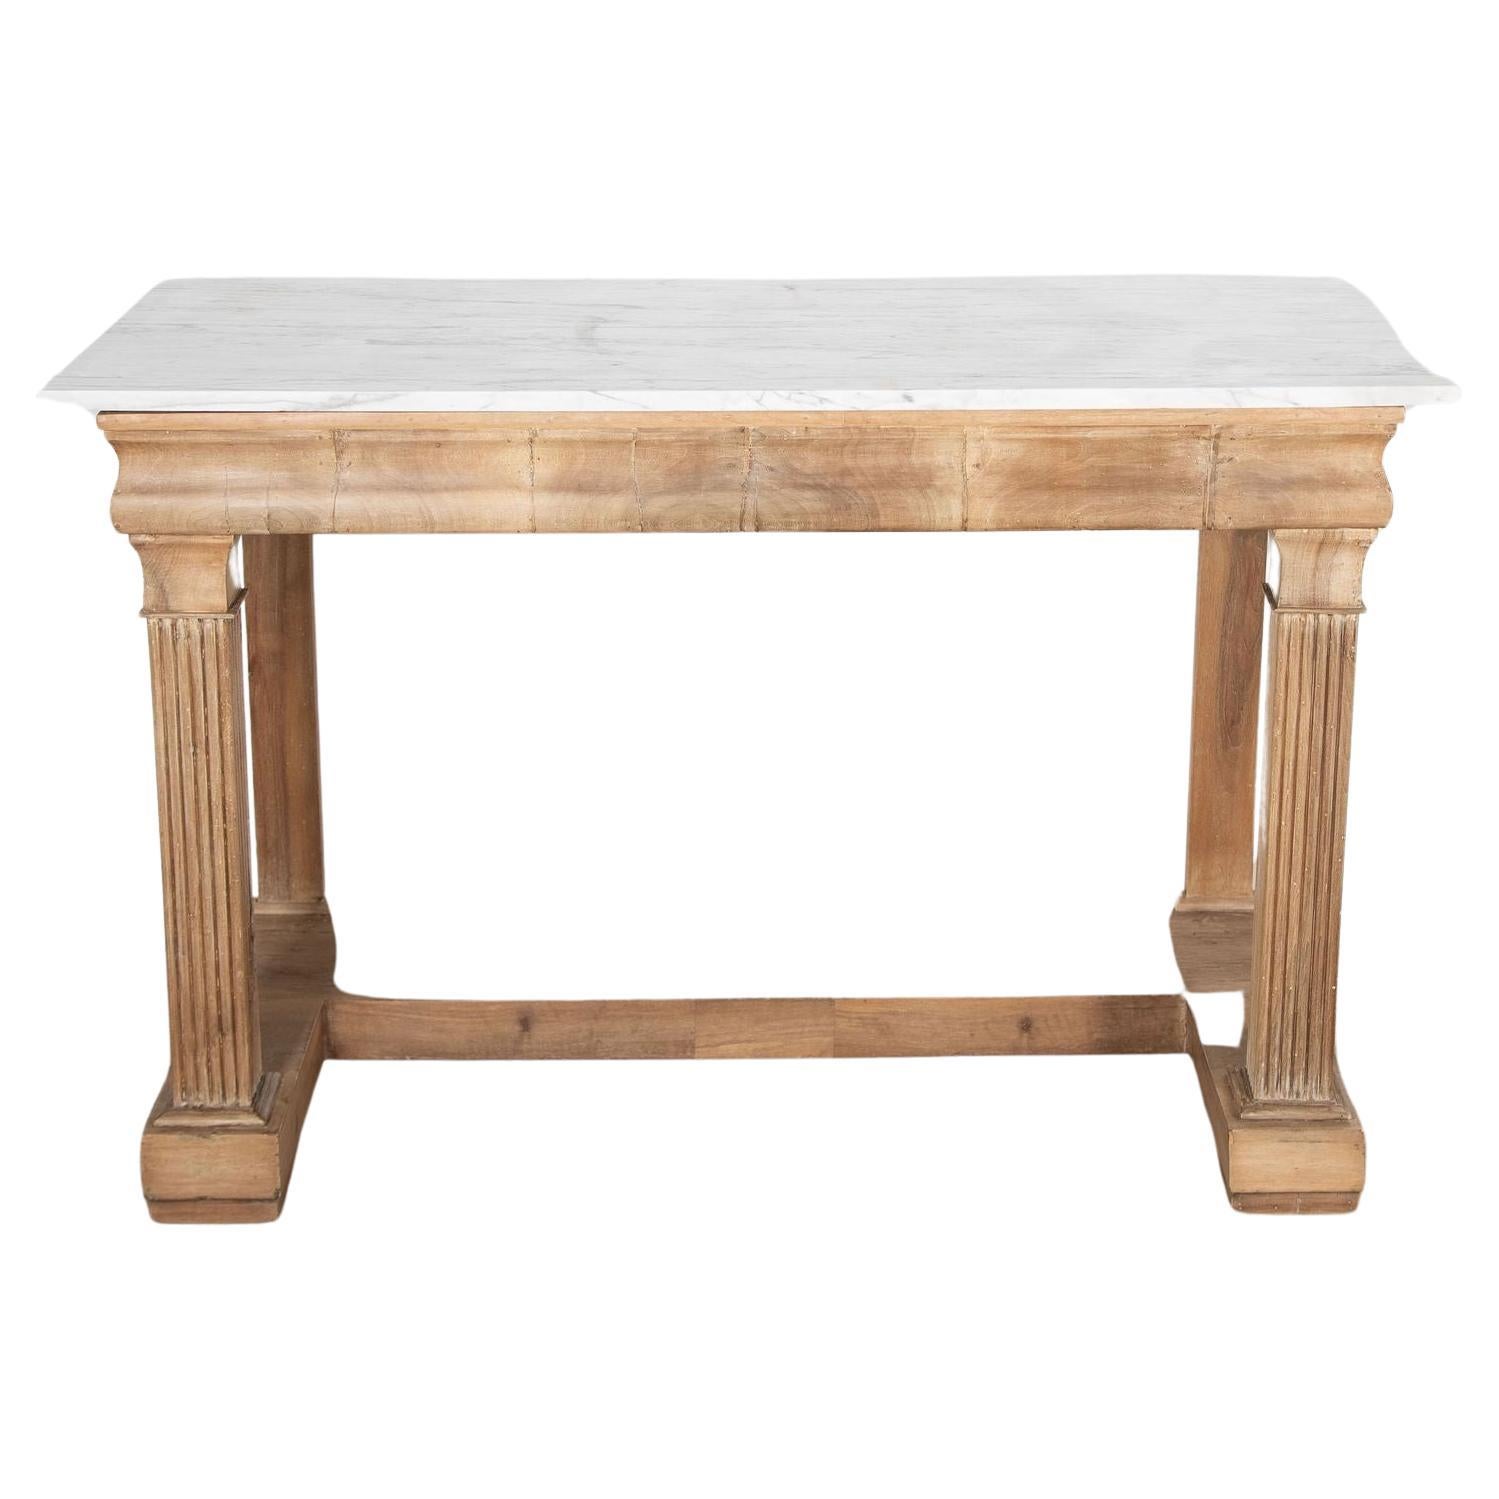 Italian Architectural Bleached Walnut Console Table For Sale